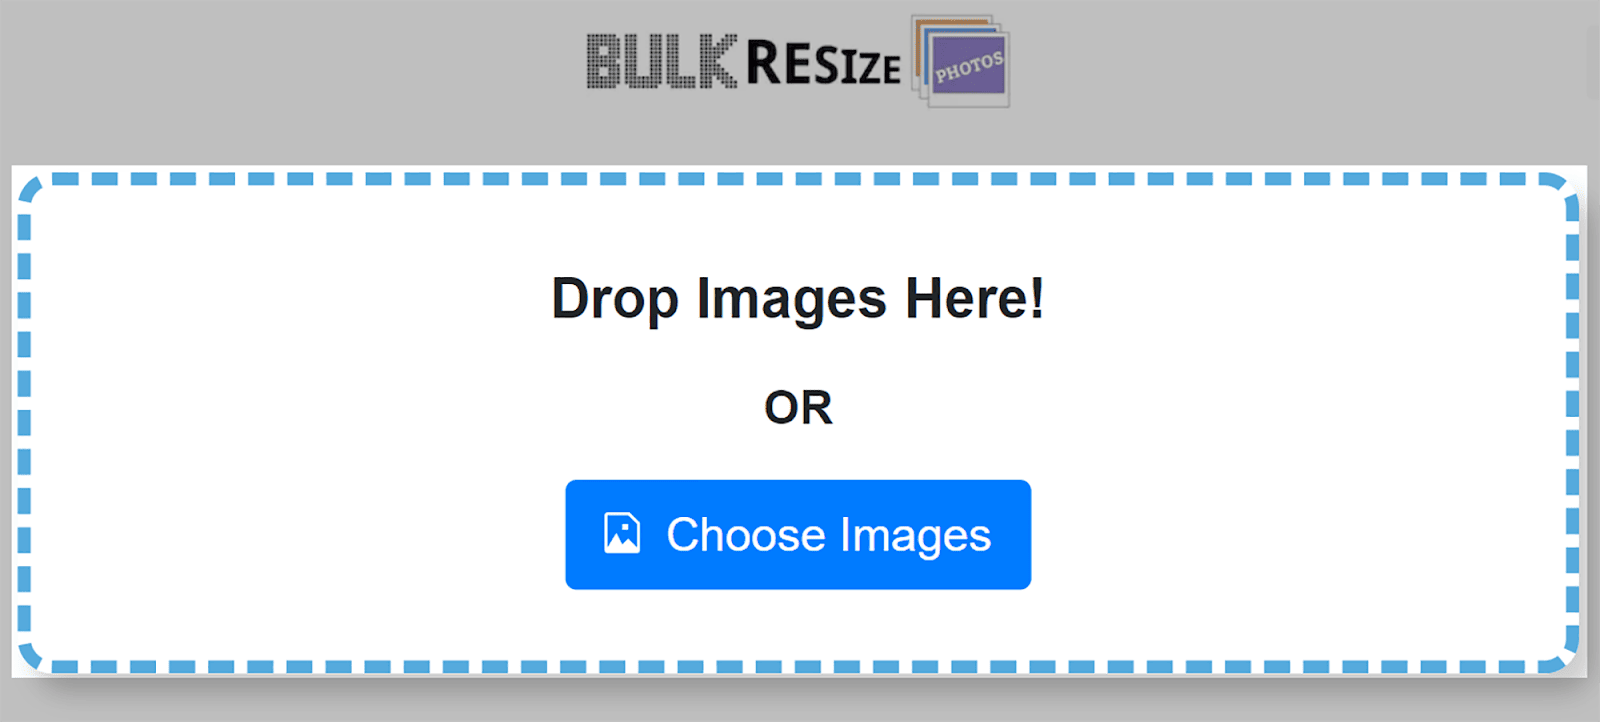 Upload images from your device